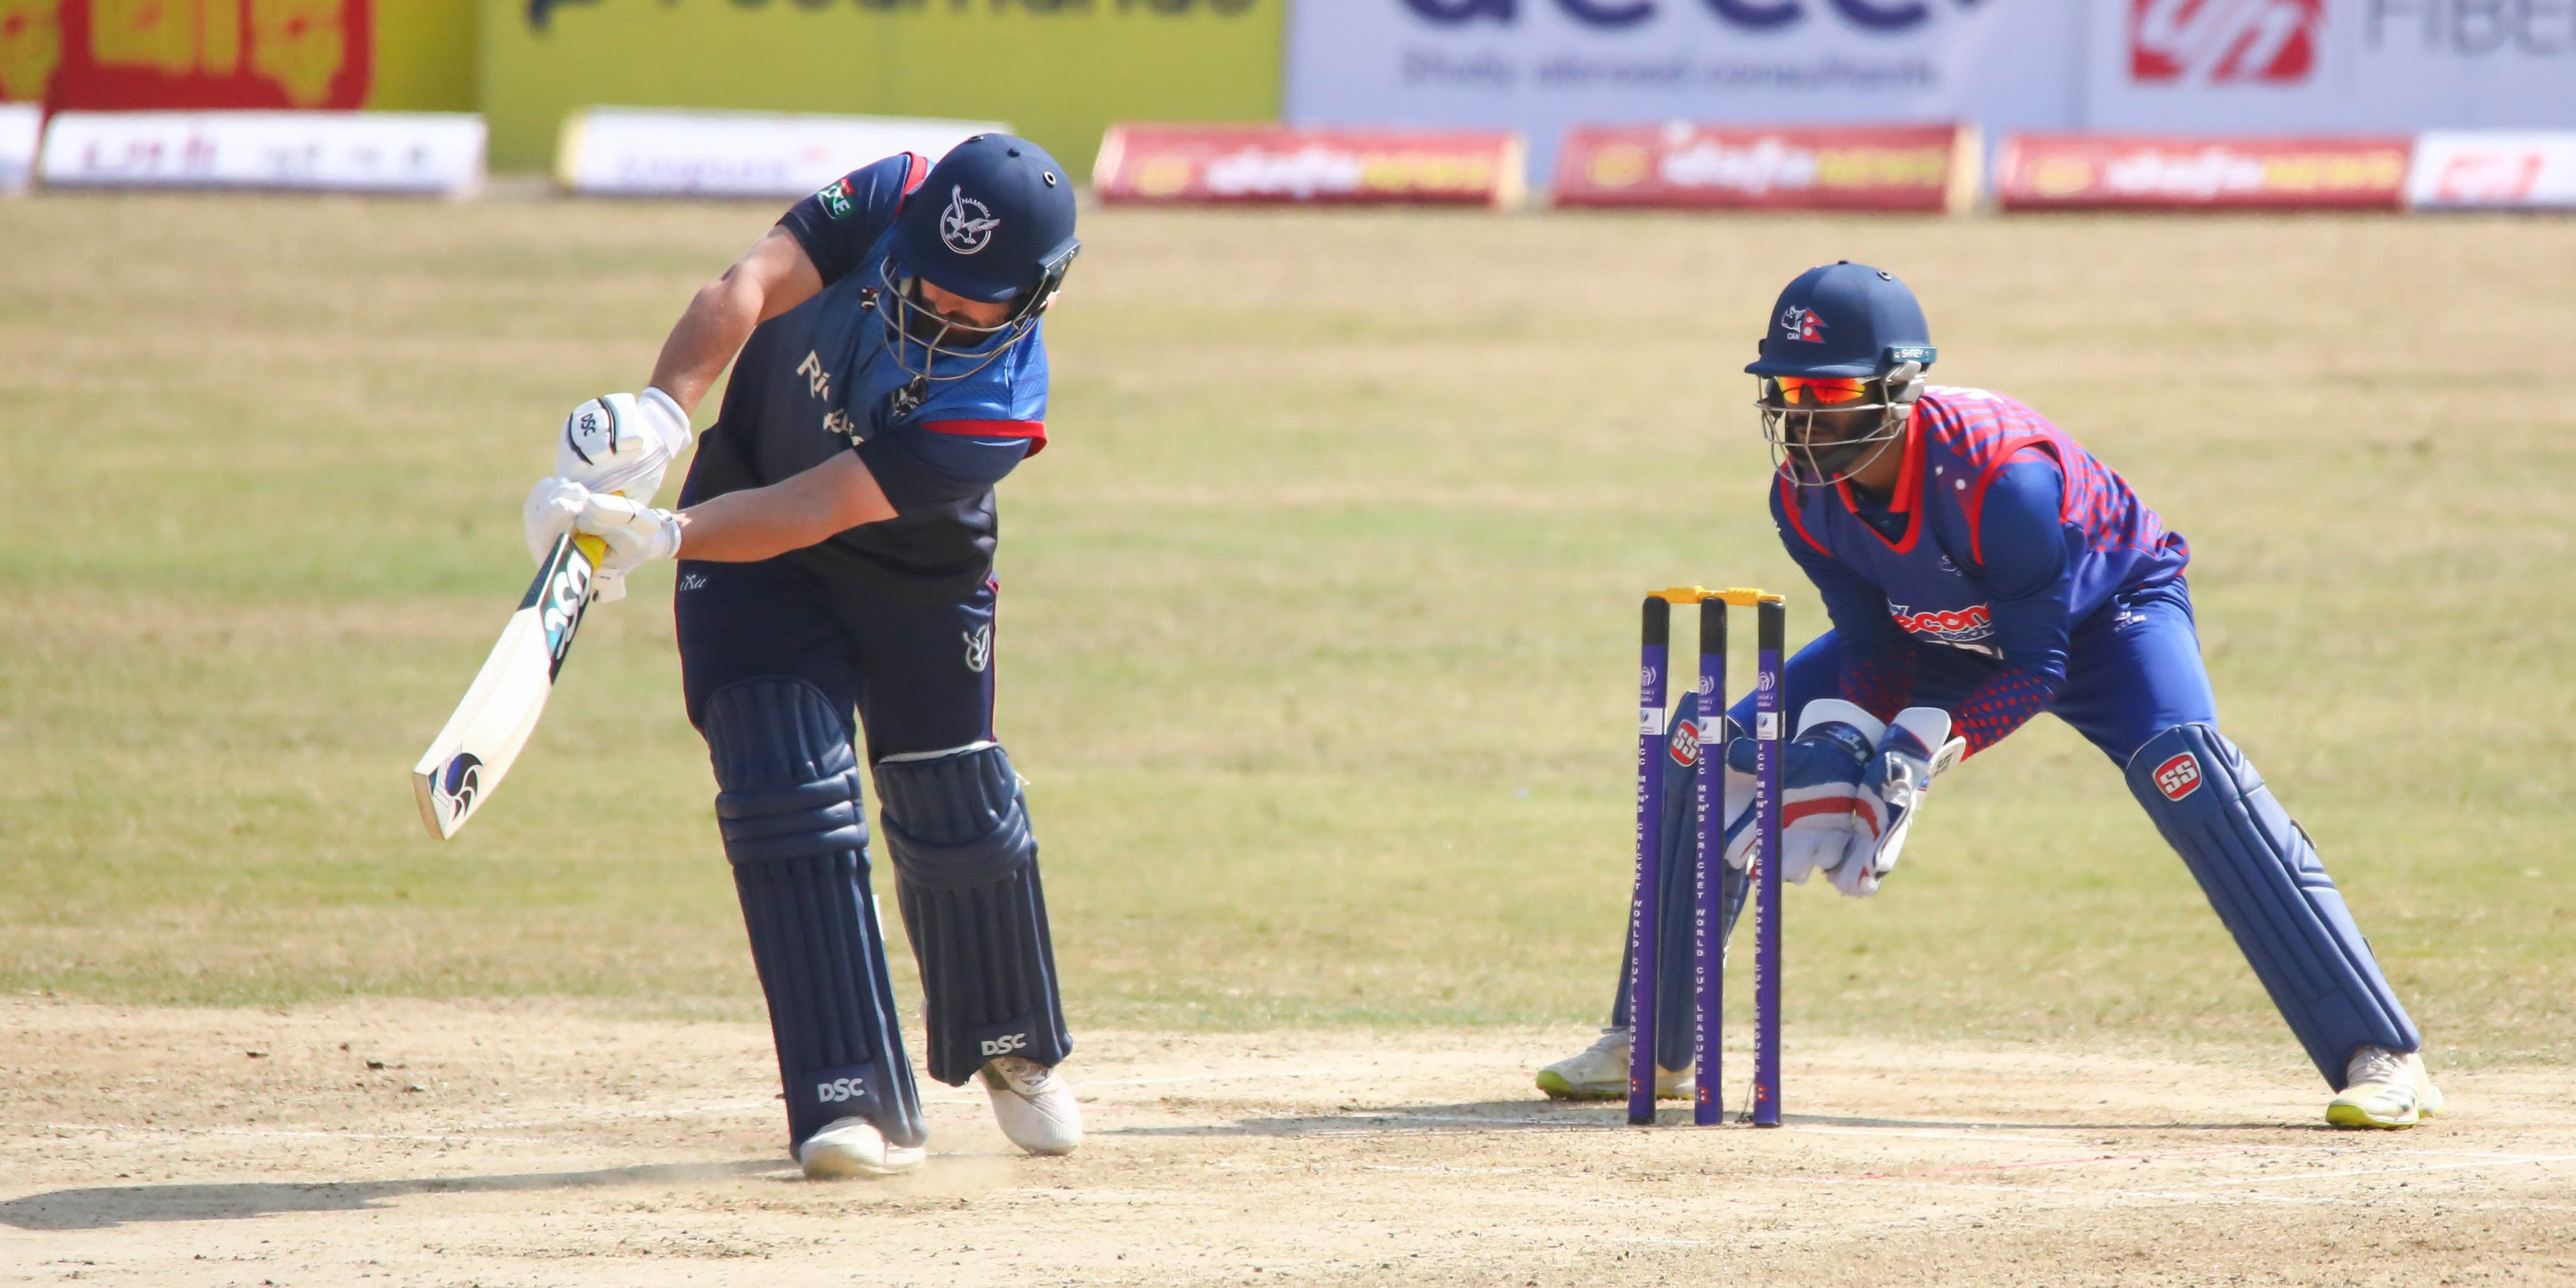 Nepal opens WCL 2 campaign with four-wicket loss to Namibia